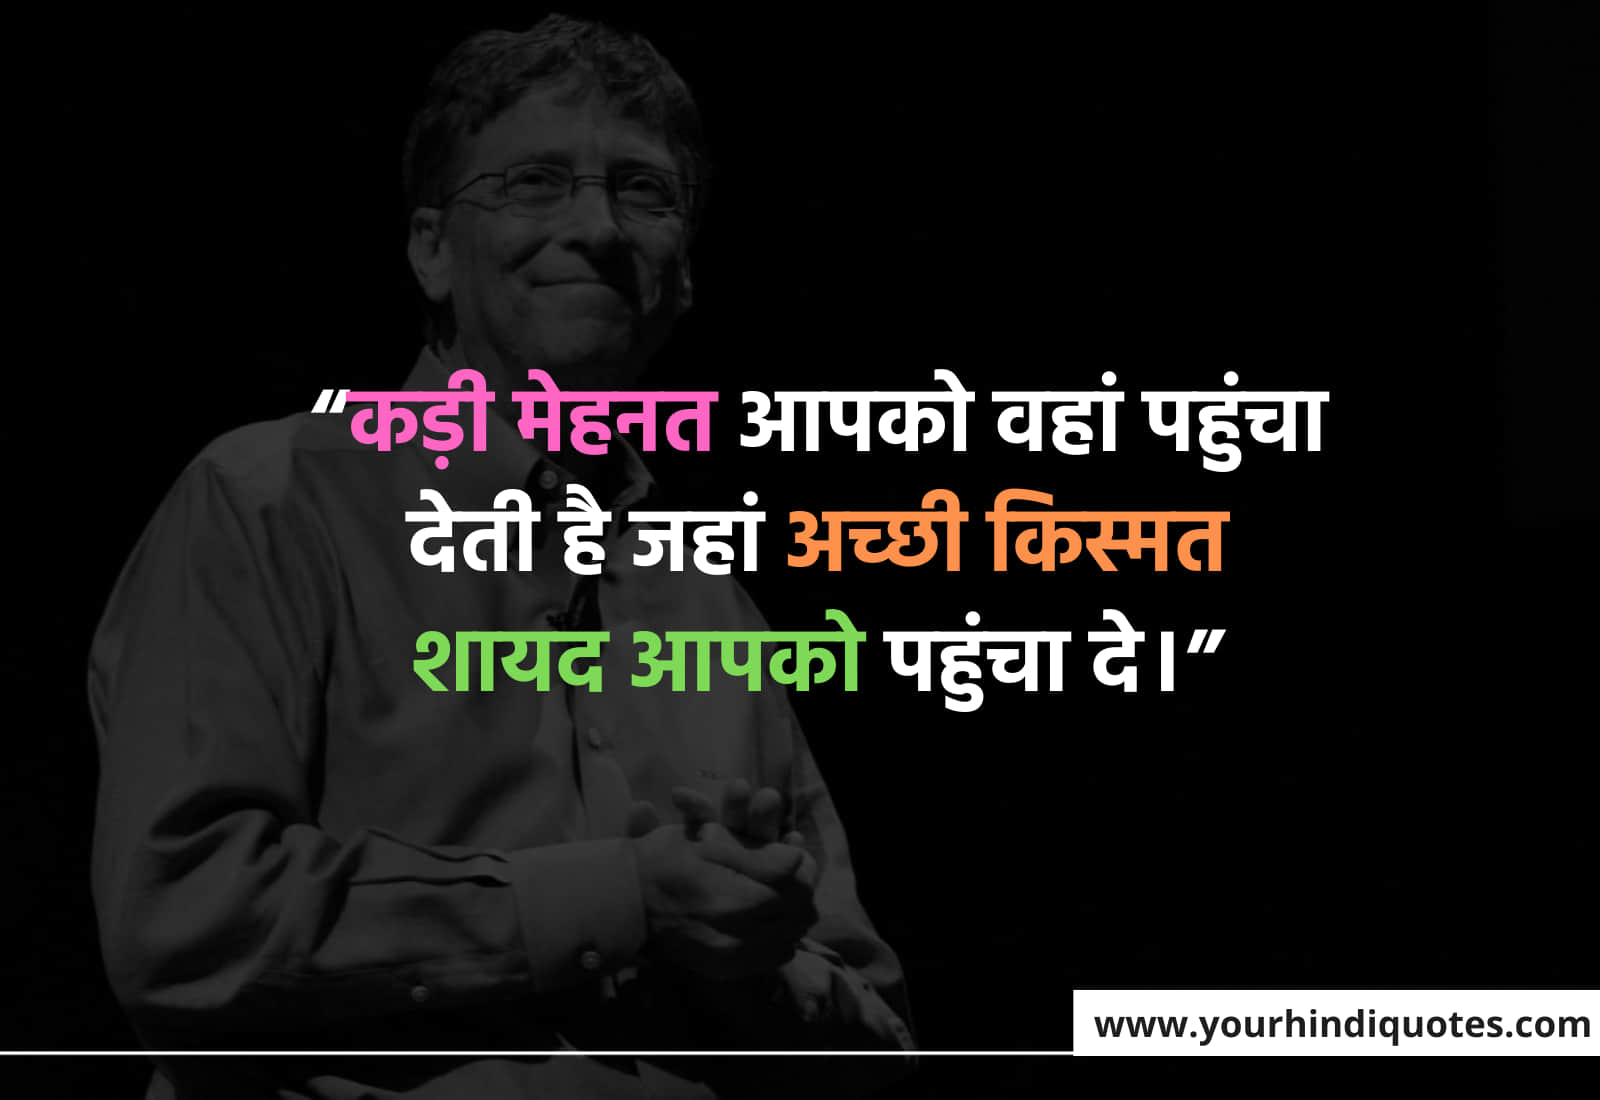 Hindi Students Quotes About Life